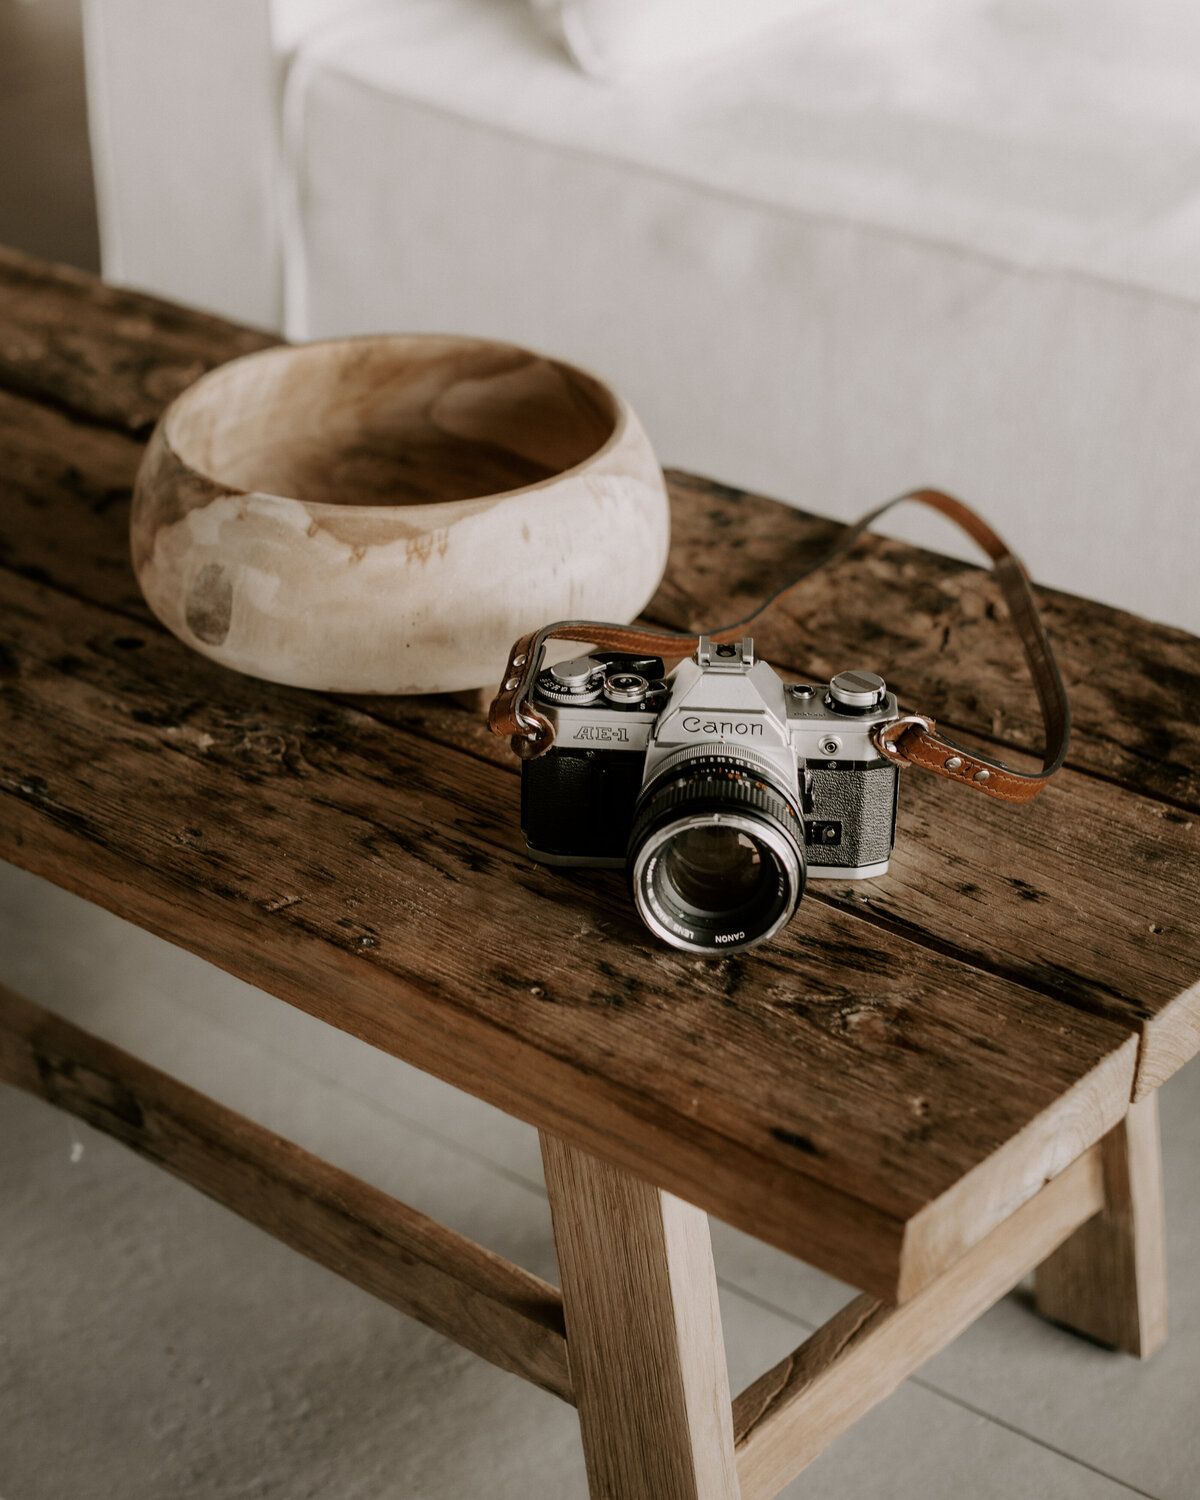 Canon analog camera on wooden table